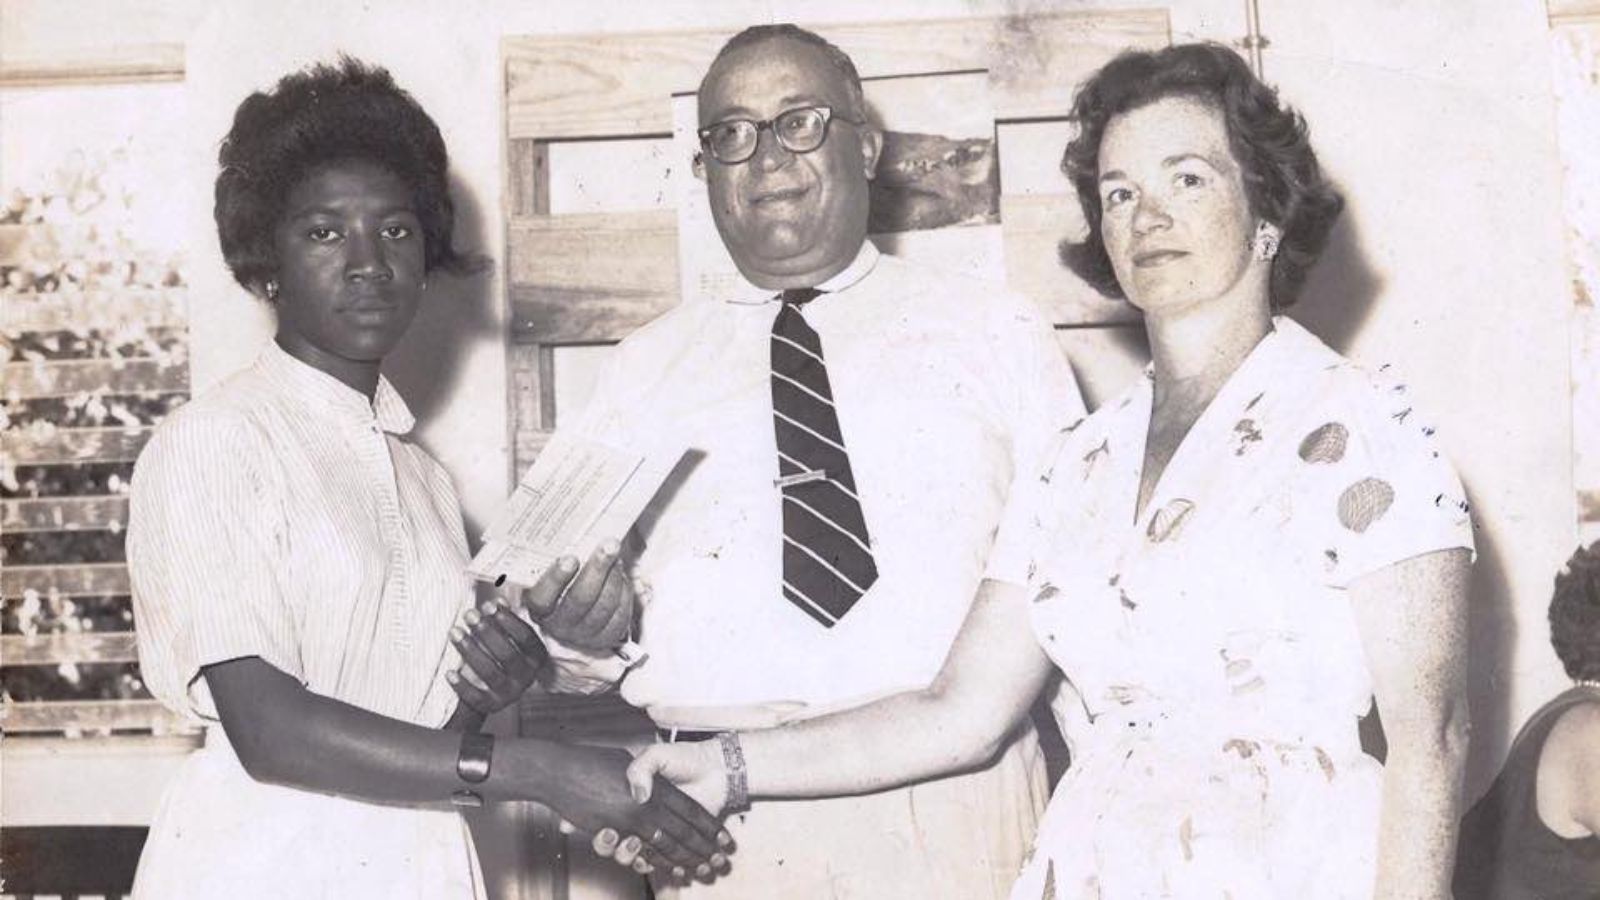 Education Spotlight - MARCH SHOWCASE #13 - SALUTING A WOMAN MAKING A  DIFFERENCE DR. RUBYANN COOPER DARLING - FIRST WOMAN REGISTERED TO VOTE IN  THE BAHAMAS, FORMER SENATOR AND FORMER MEMBER OF